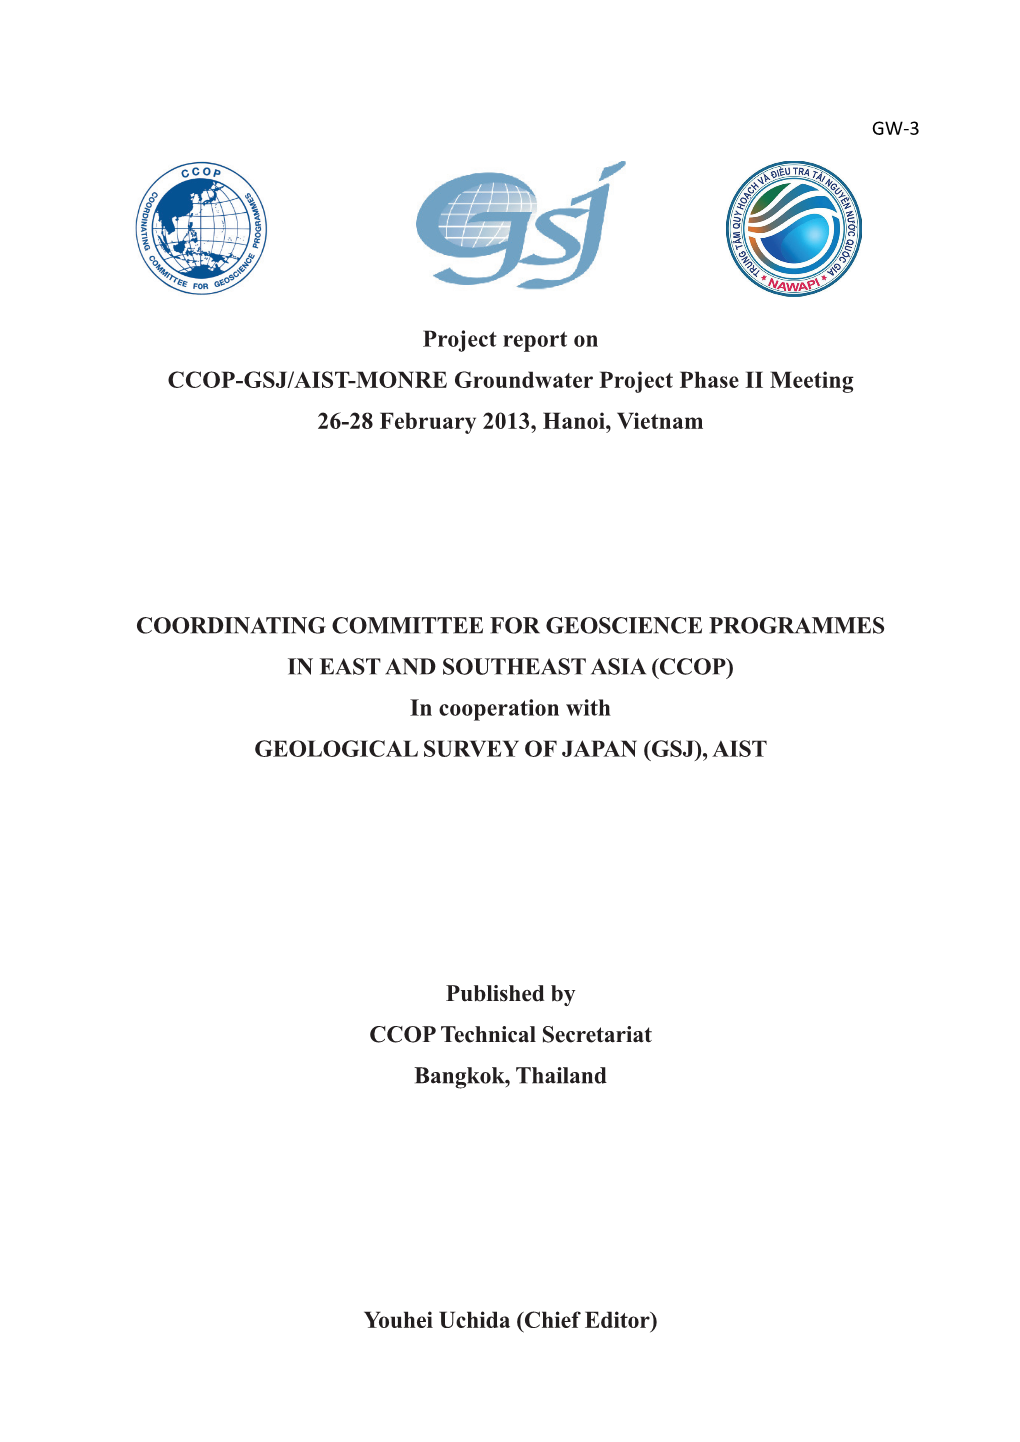 Project Report on CCOP-GSJ/AIST-MONRE Groundwater Project Phase II Meeting 26-28 February 2013, Hanoi, Vietnam